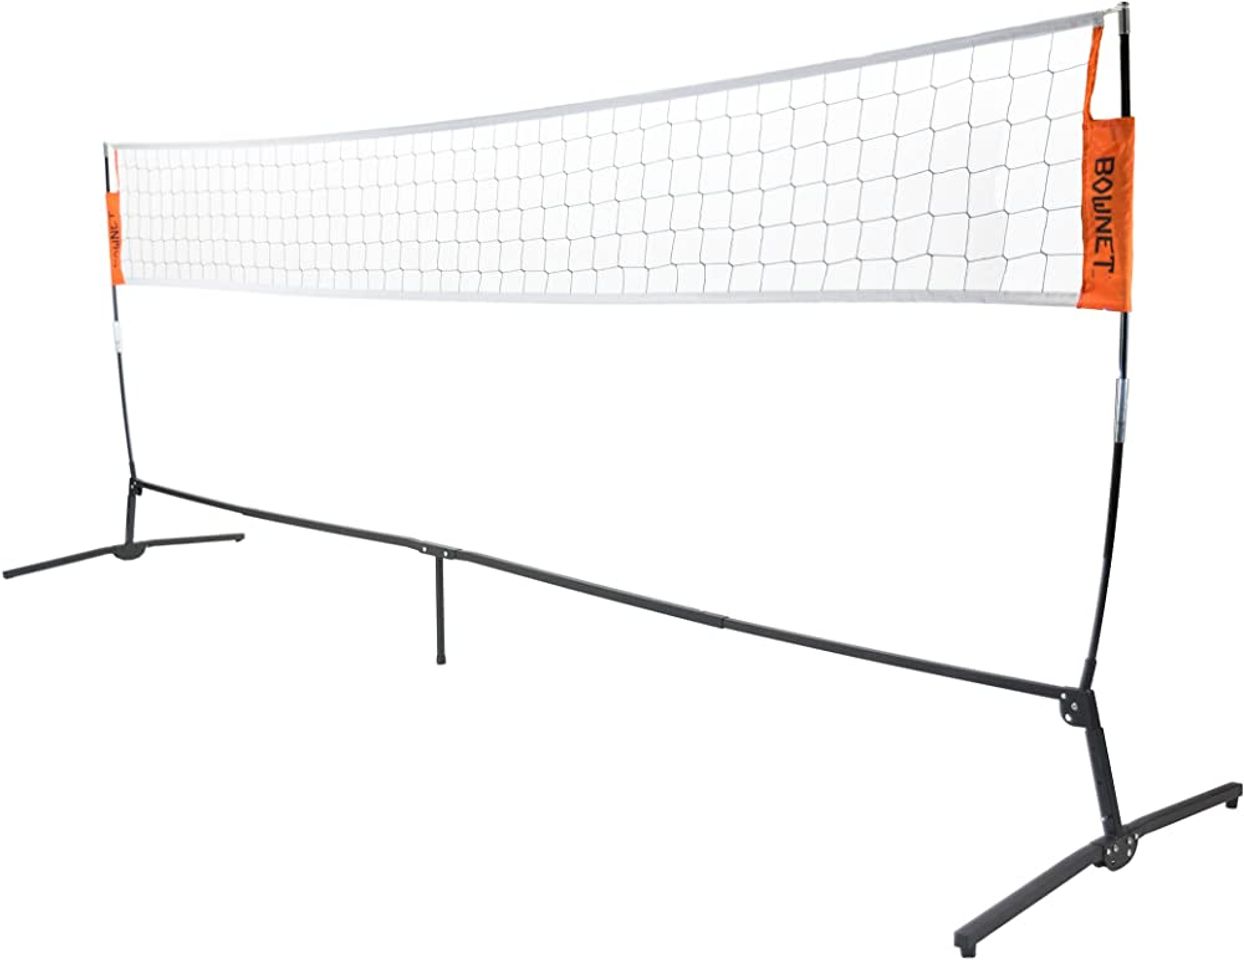 Bownet Portable Volleyball Net